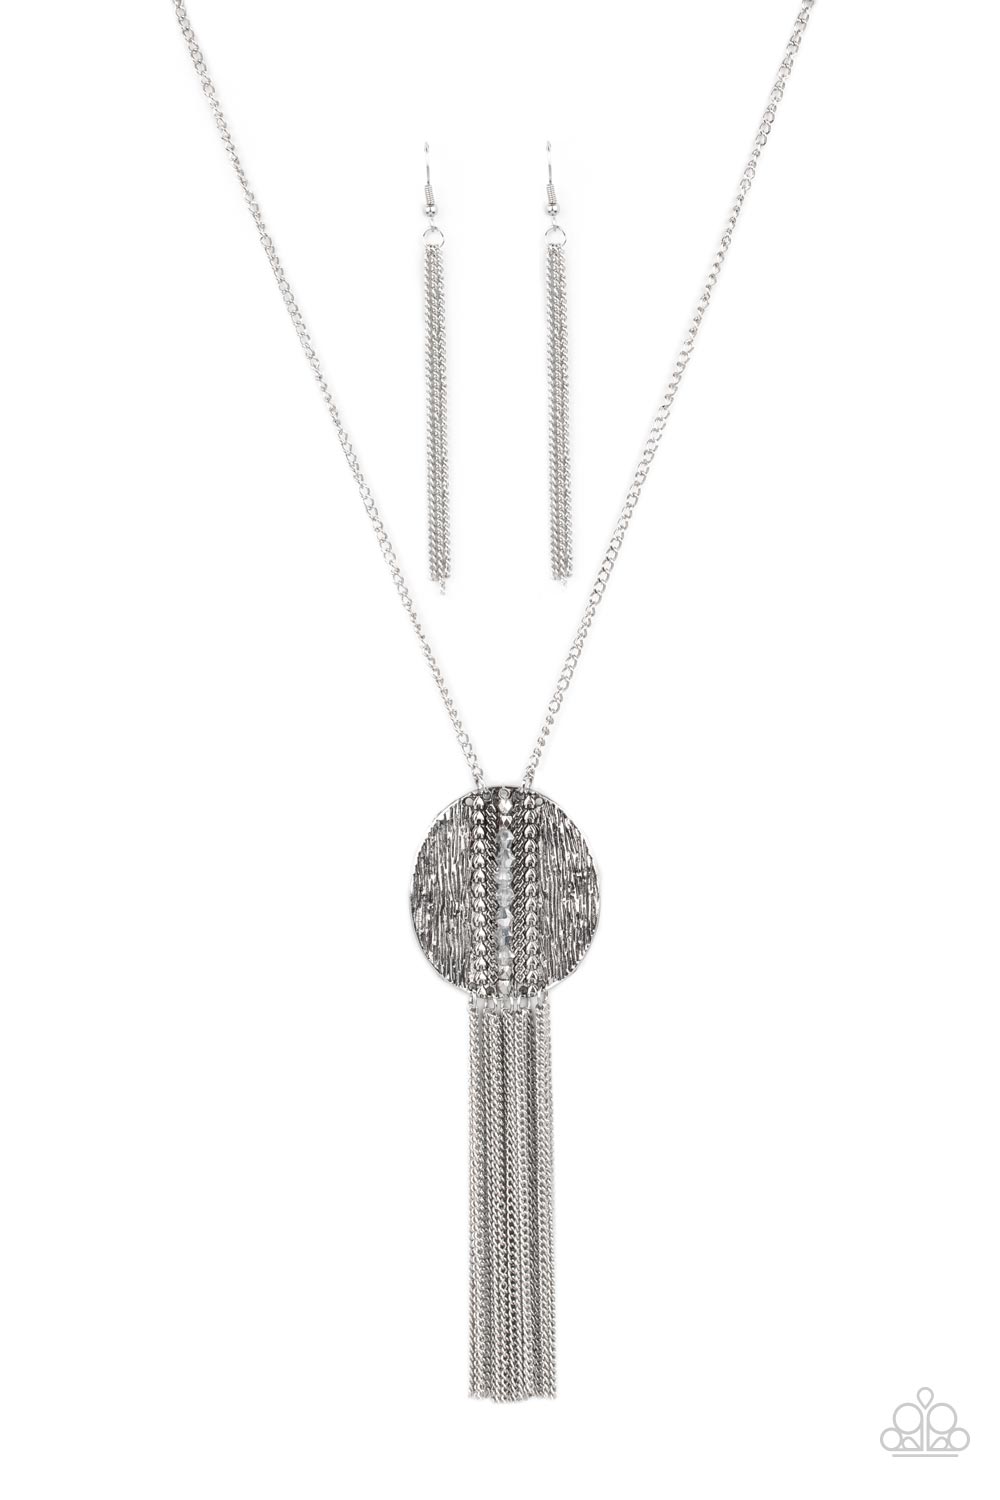 Radical Refinery Silver Necklace - Paparazzi Accessories- lightbox - CarasShop.com - $5 Jewelry by Cara Jewels